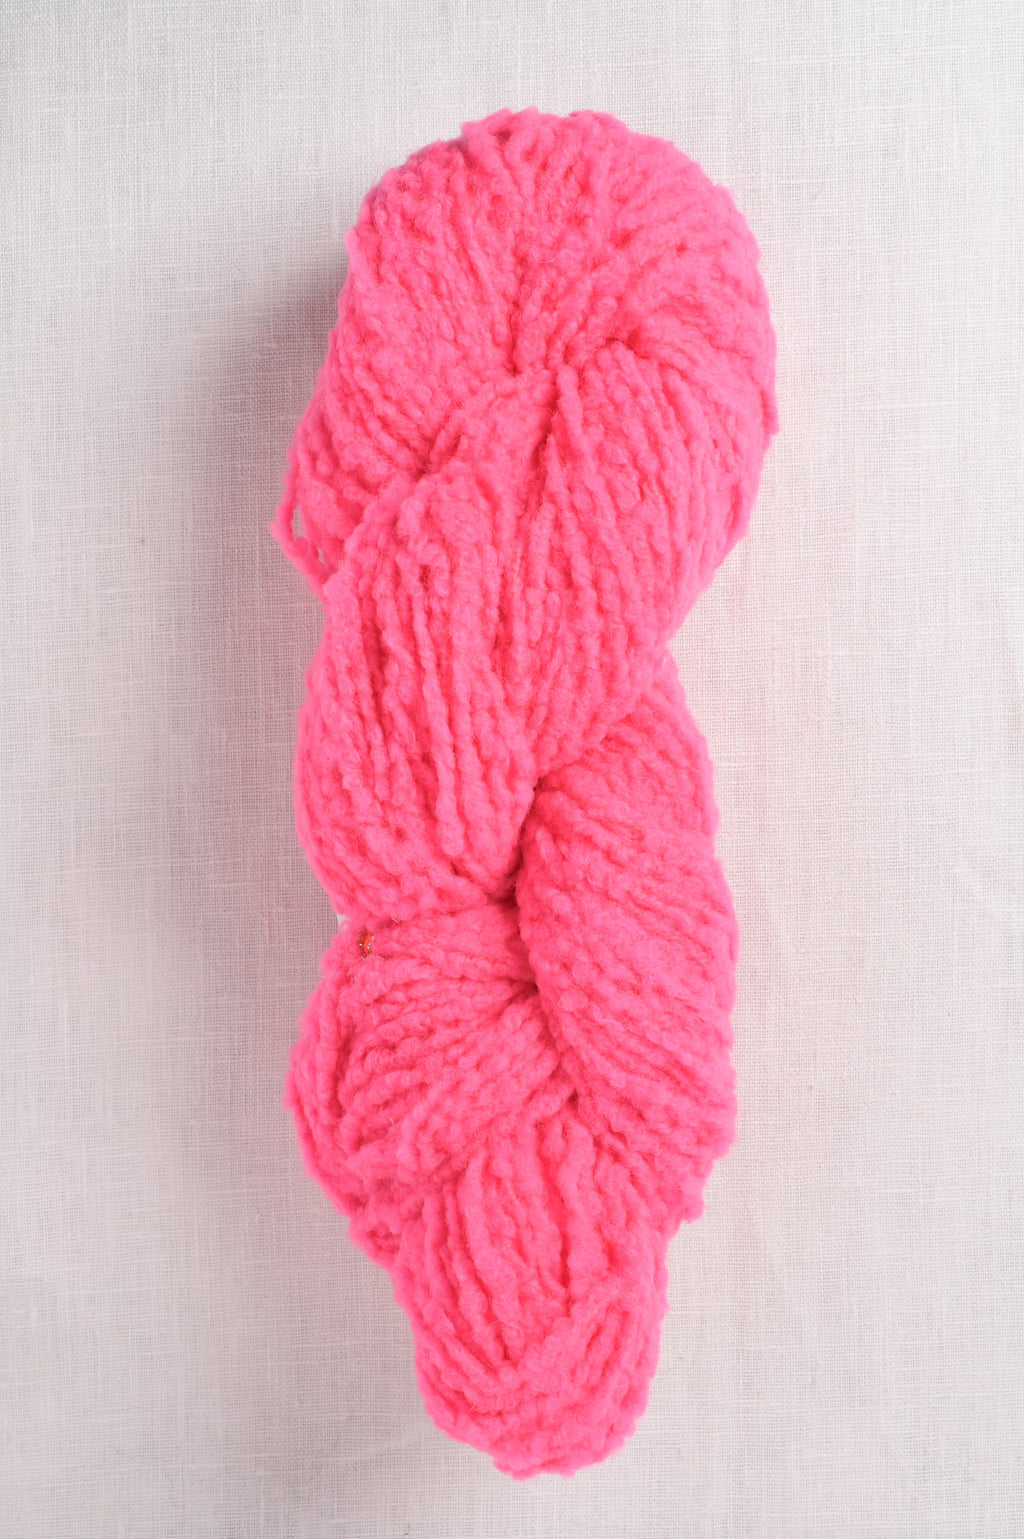 Knit Collage Serenity Coral Cabana